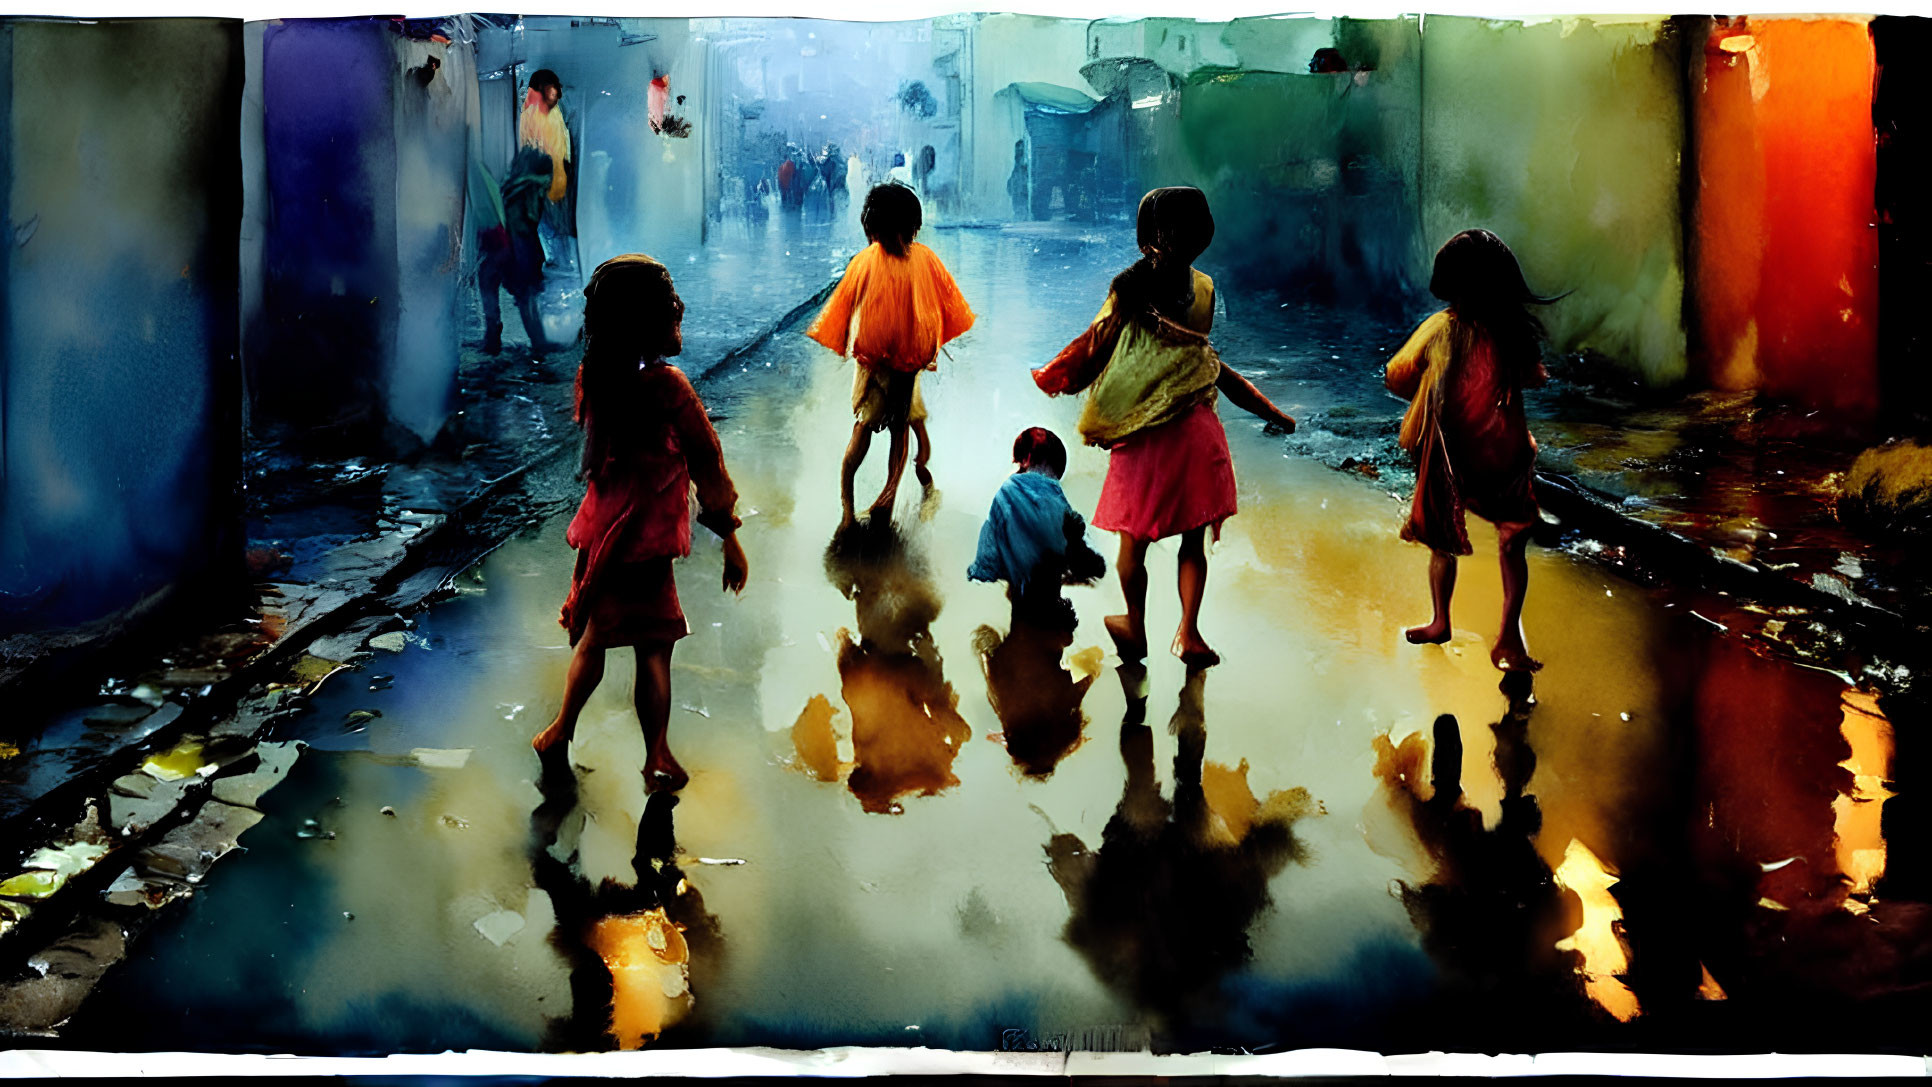 Vibrant street scene: children playing in colorful puddle under rainy sky